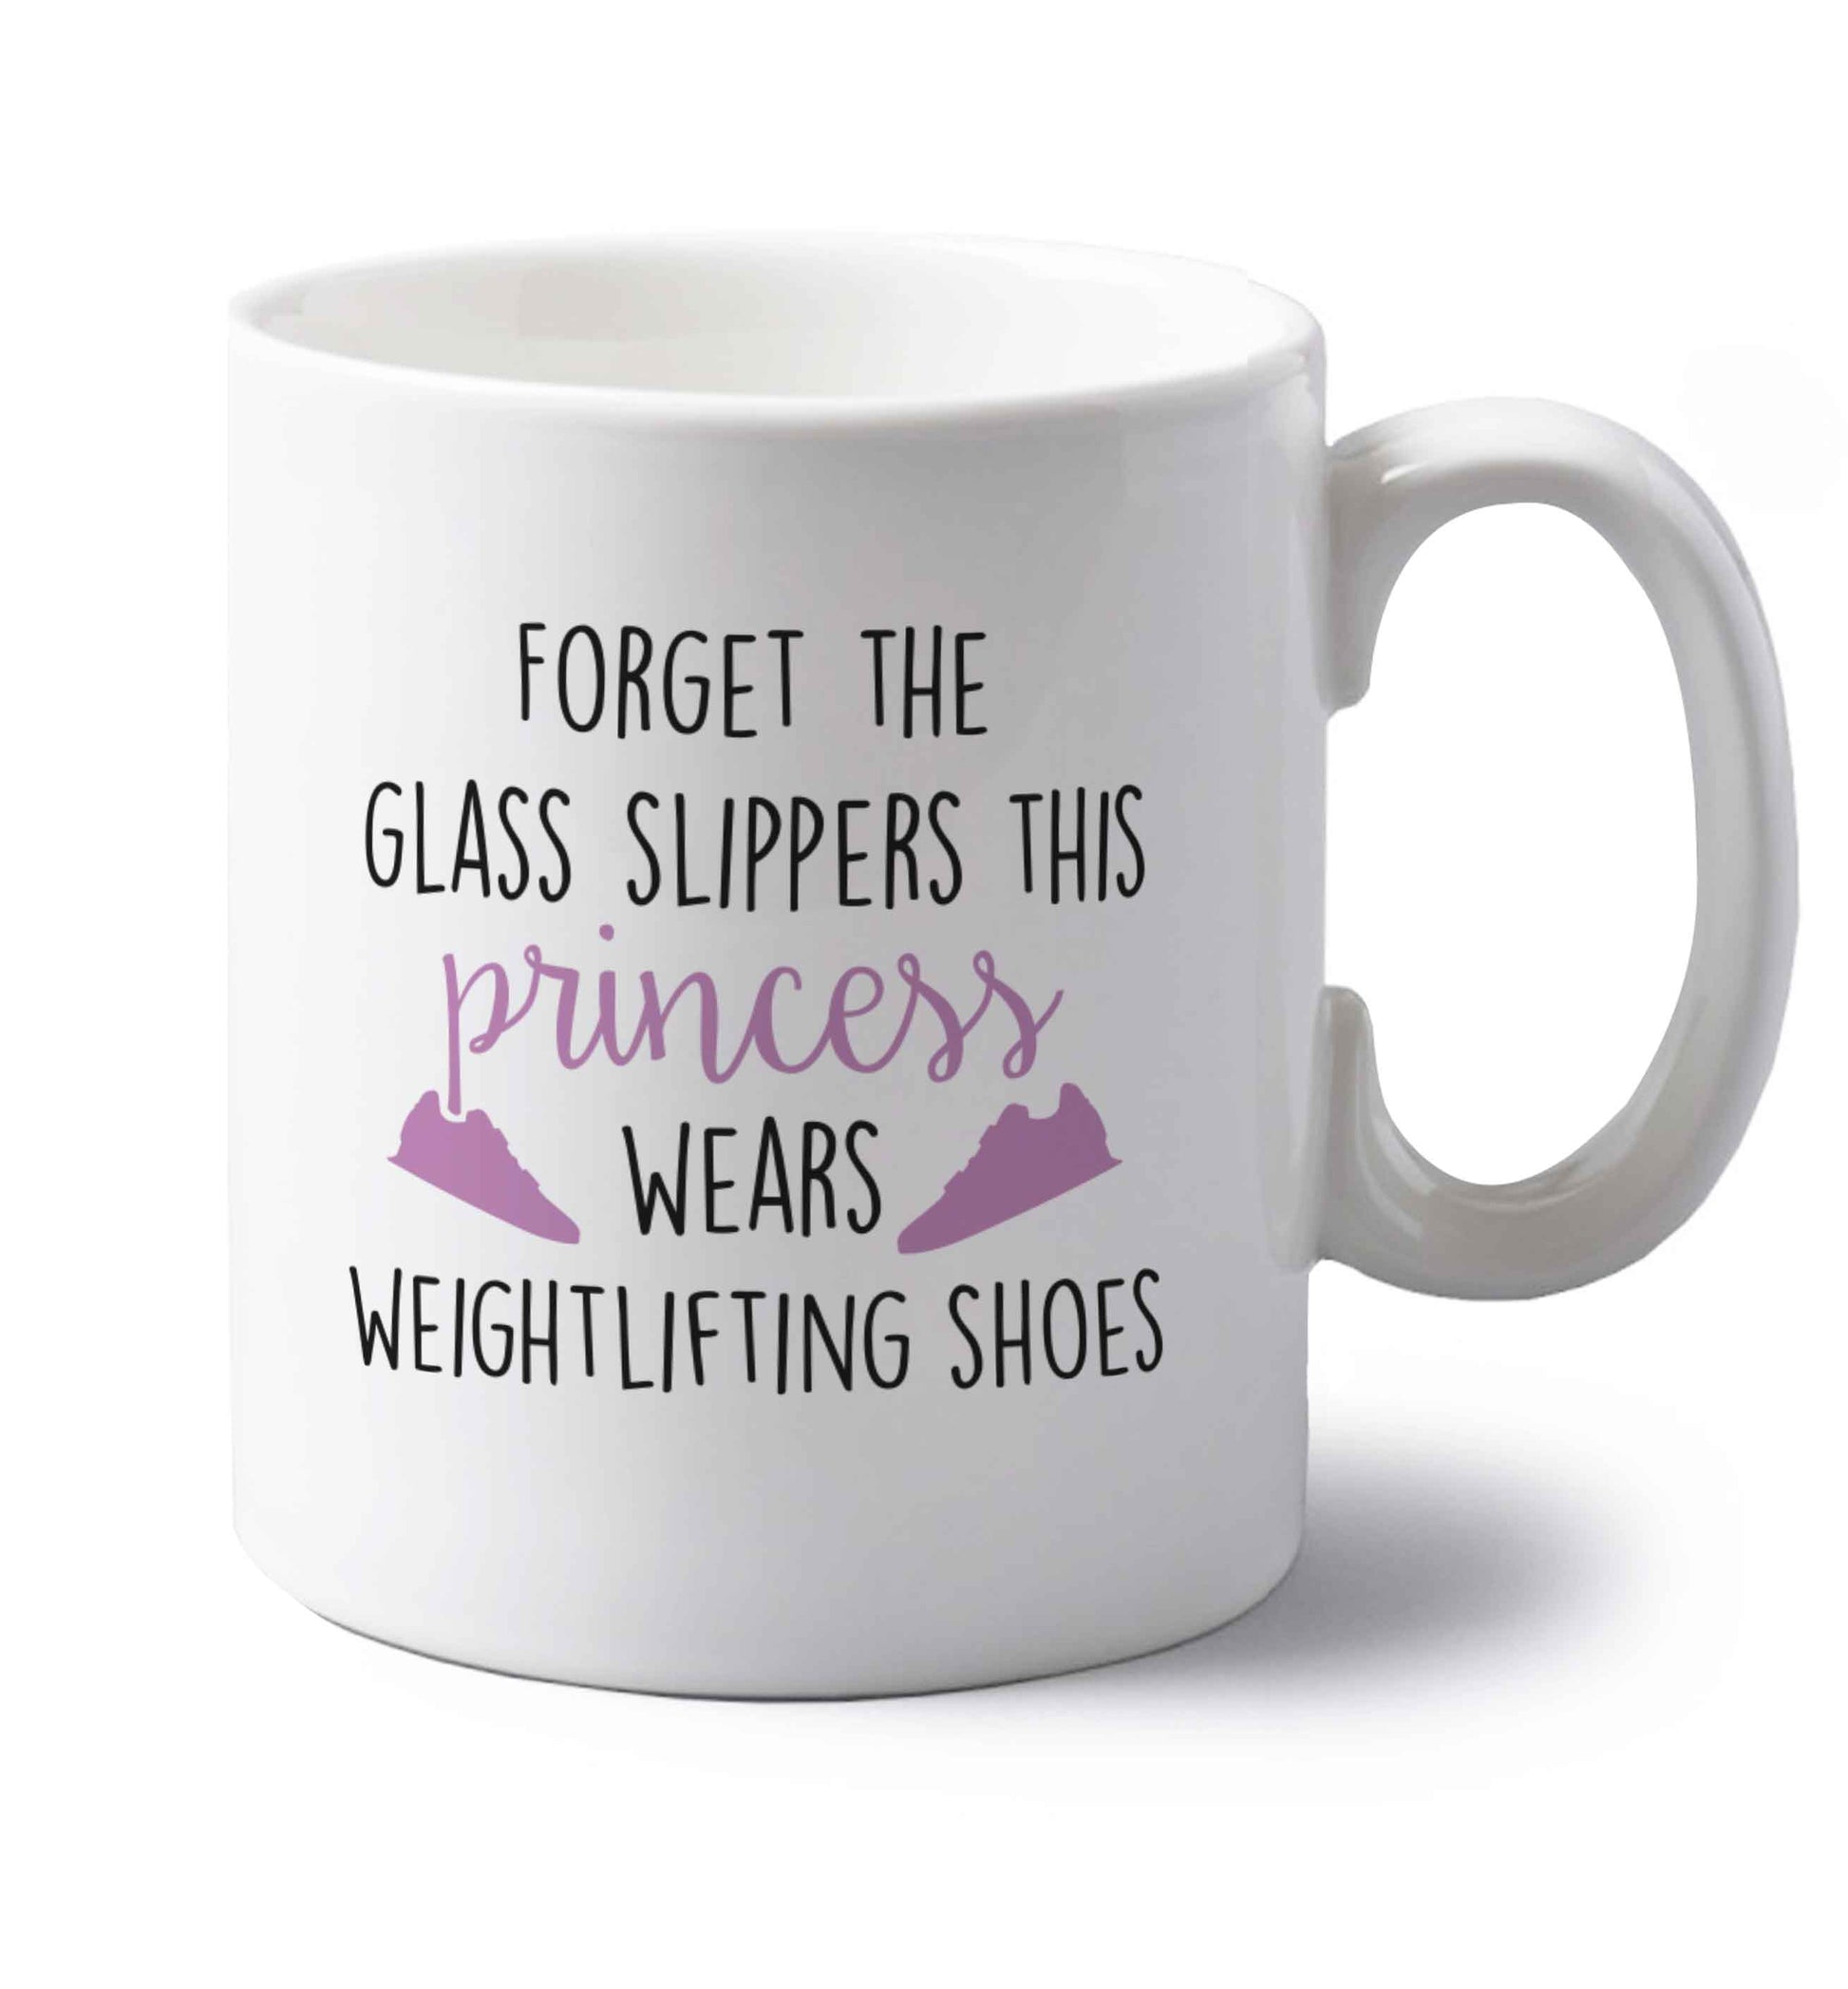 Forget the glass slippers this princess wears weightlifting shoes left handed white ceramic mug 